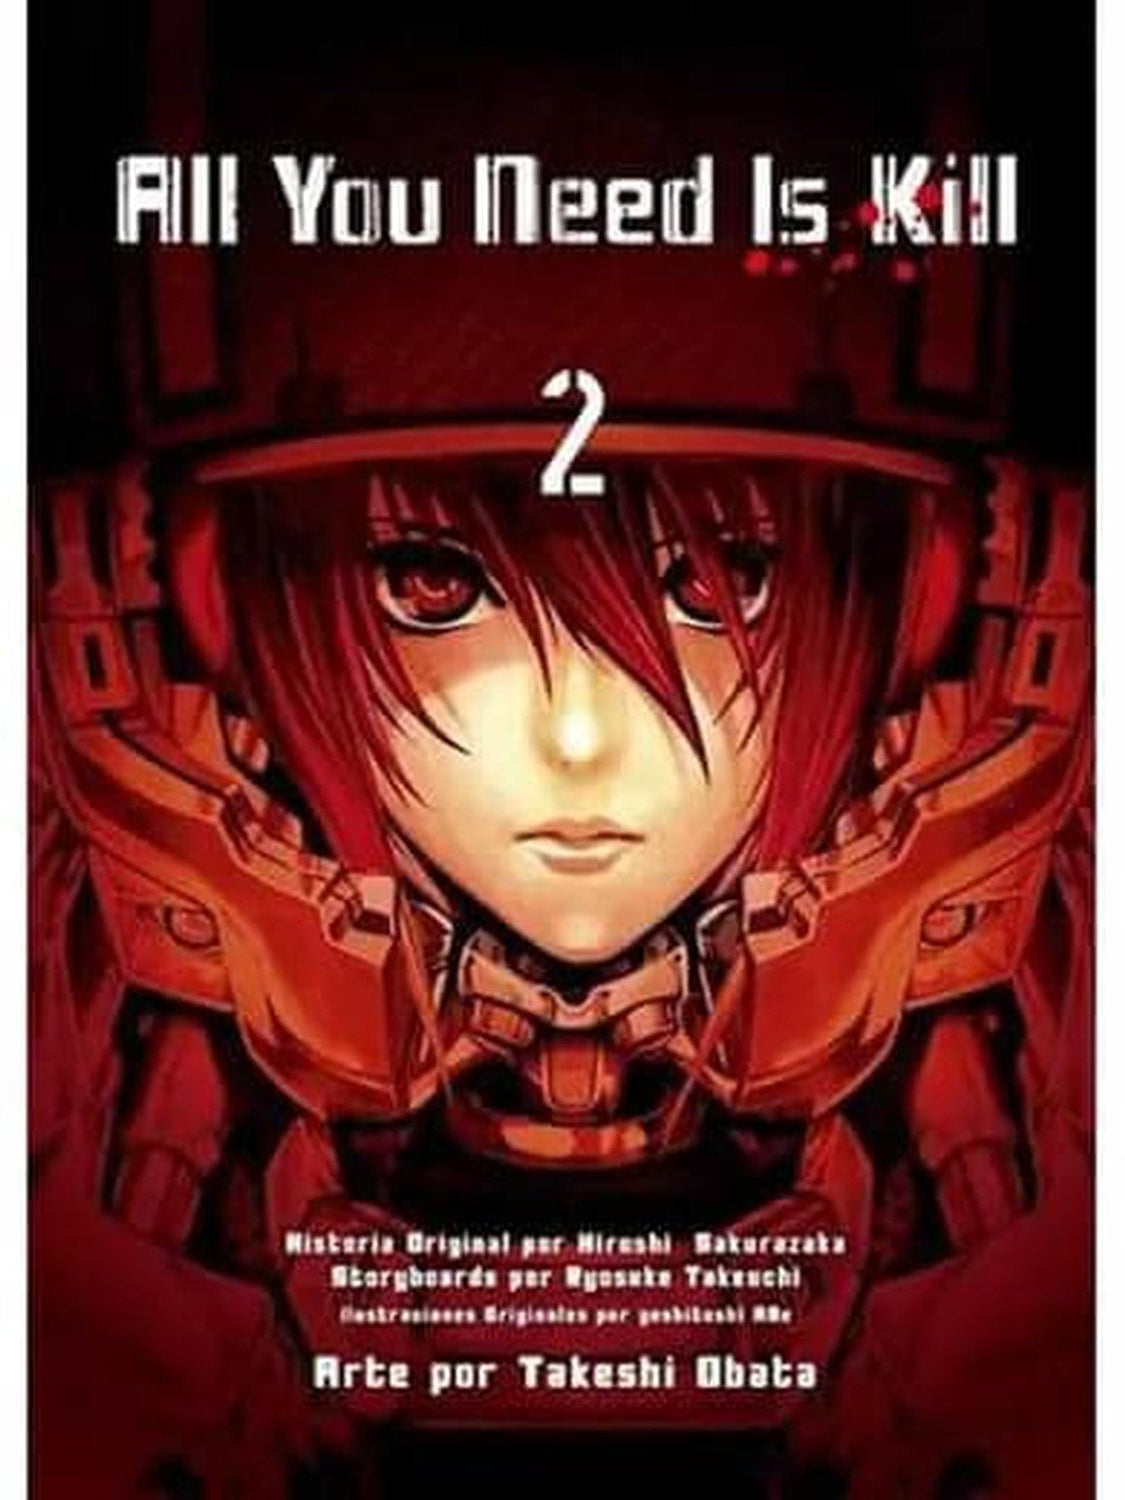 All You Need Is Kill #2